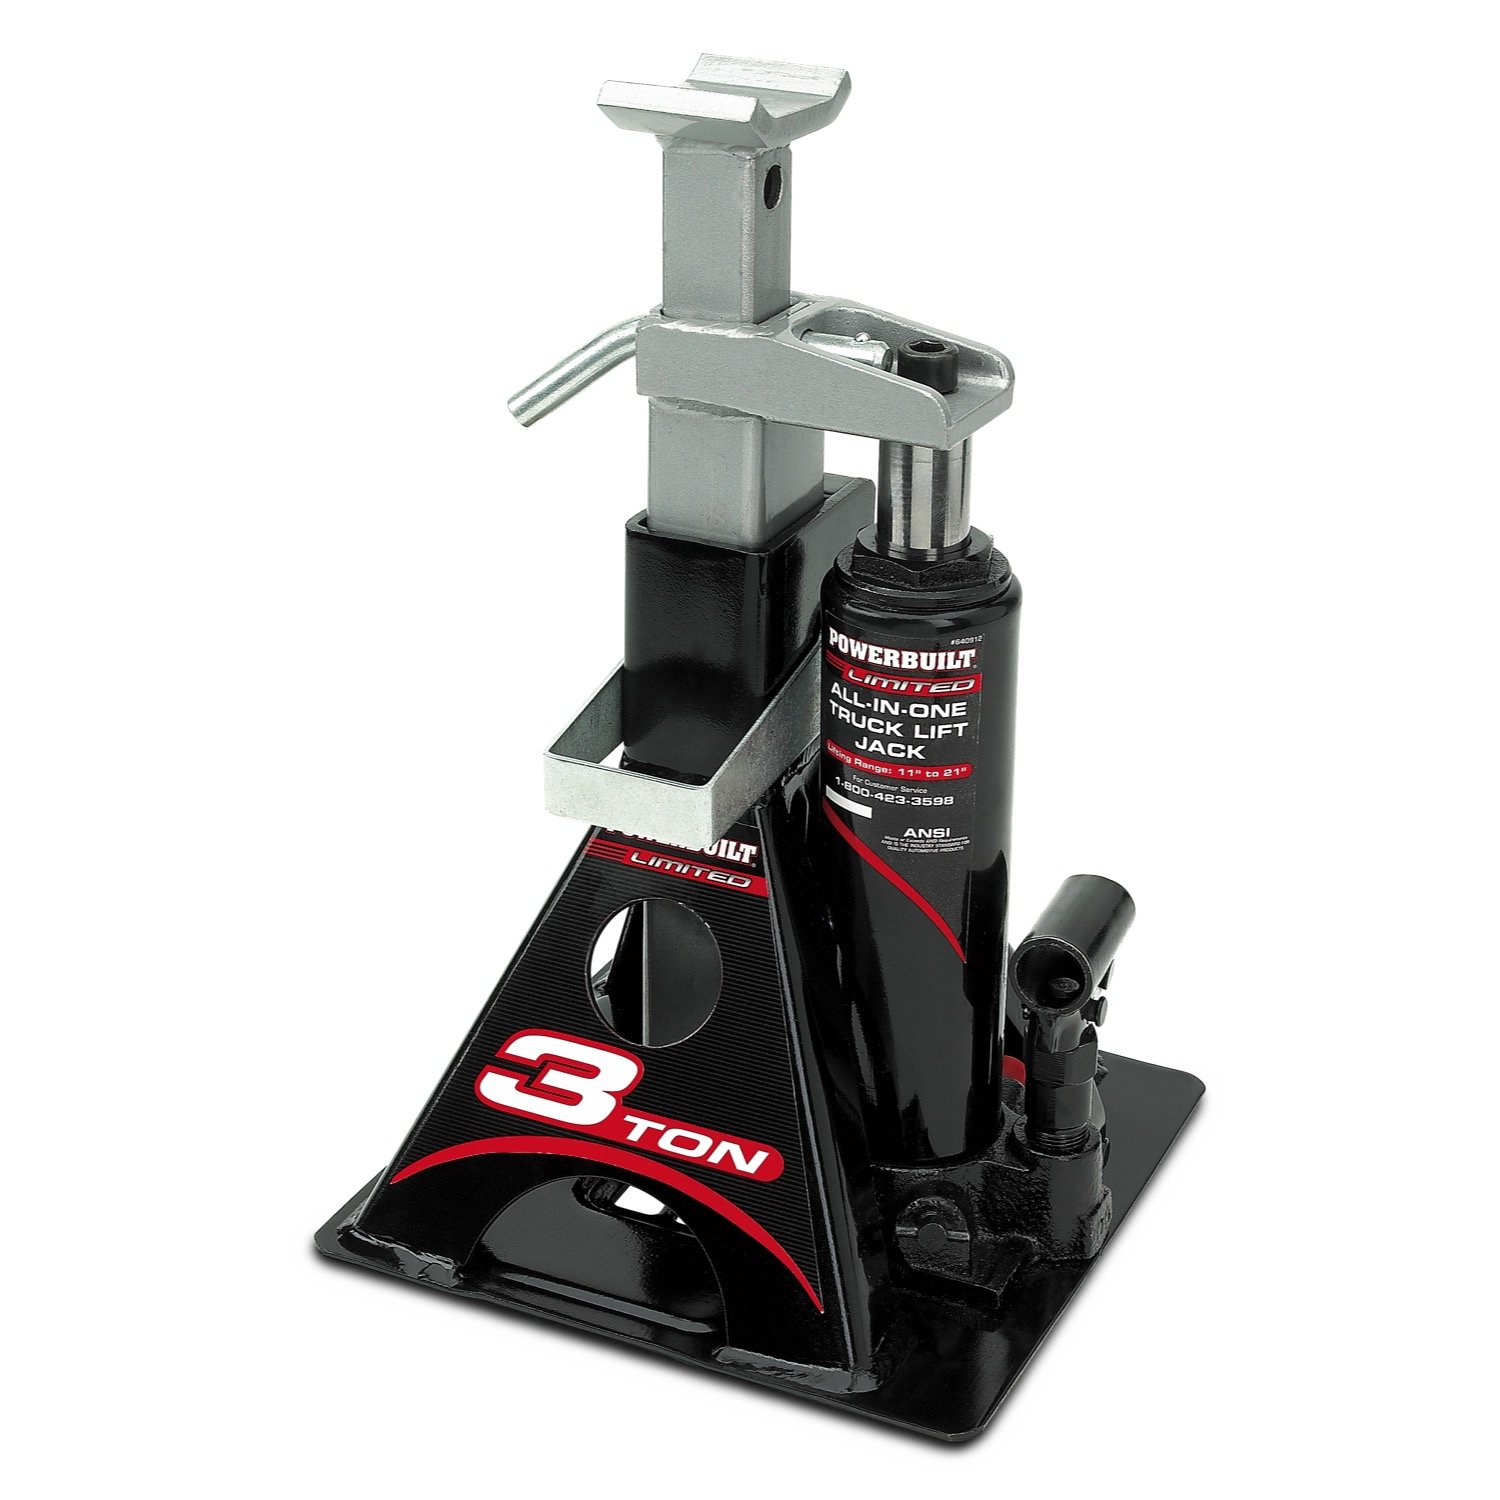 Powerbuilt 3 Ton All-in-One Jackstand/Bottle Jack - 640912 - image 1 of 6